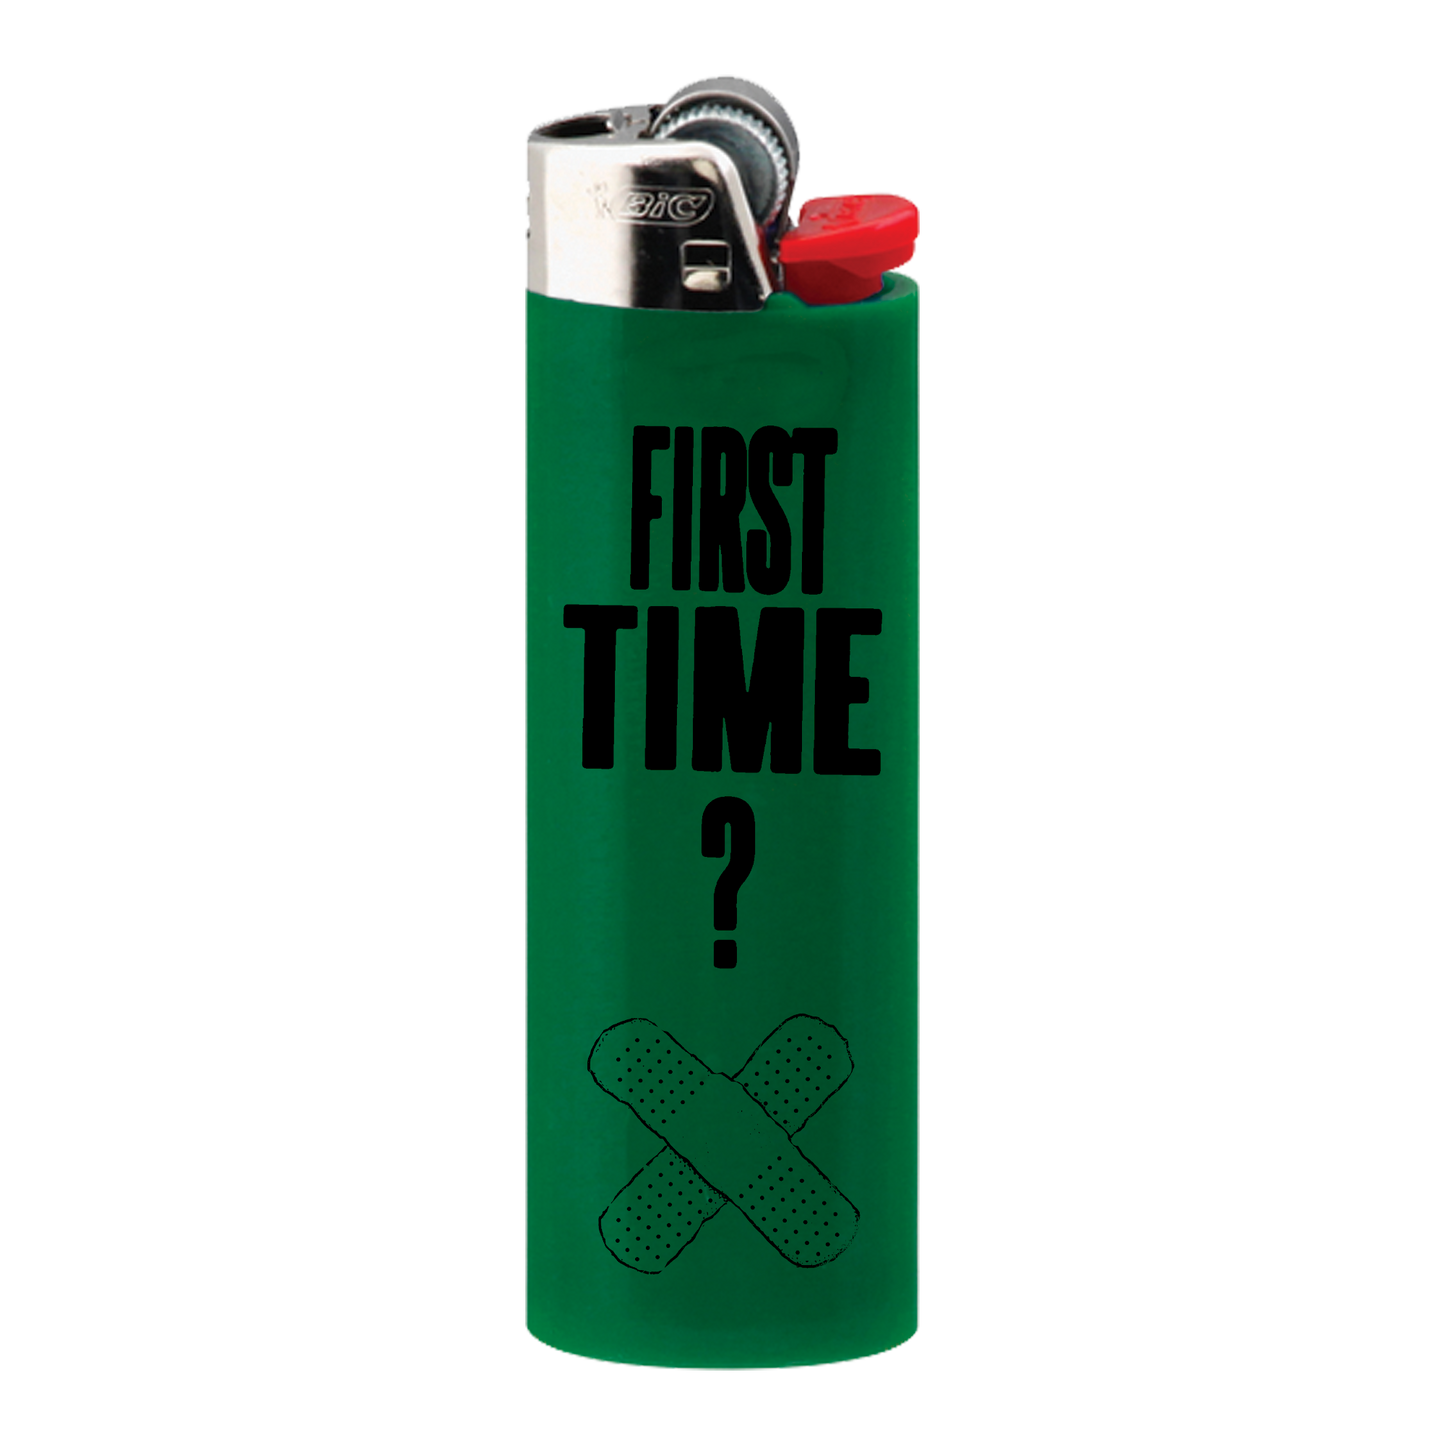 The First Time Lighter